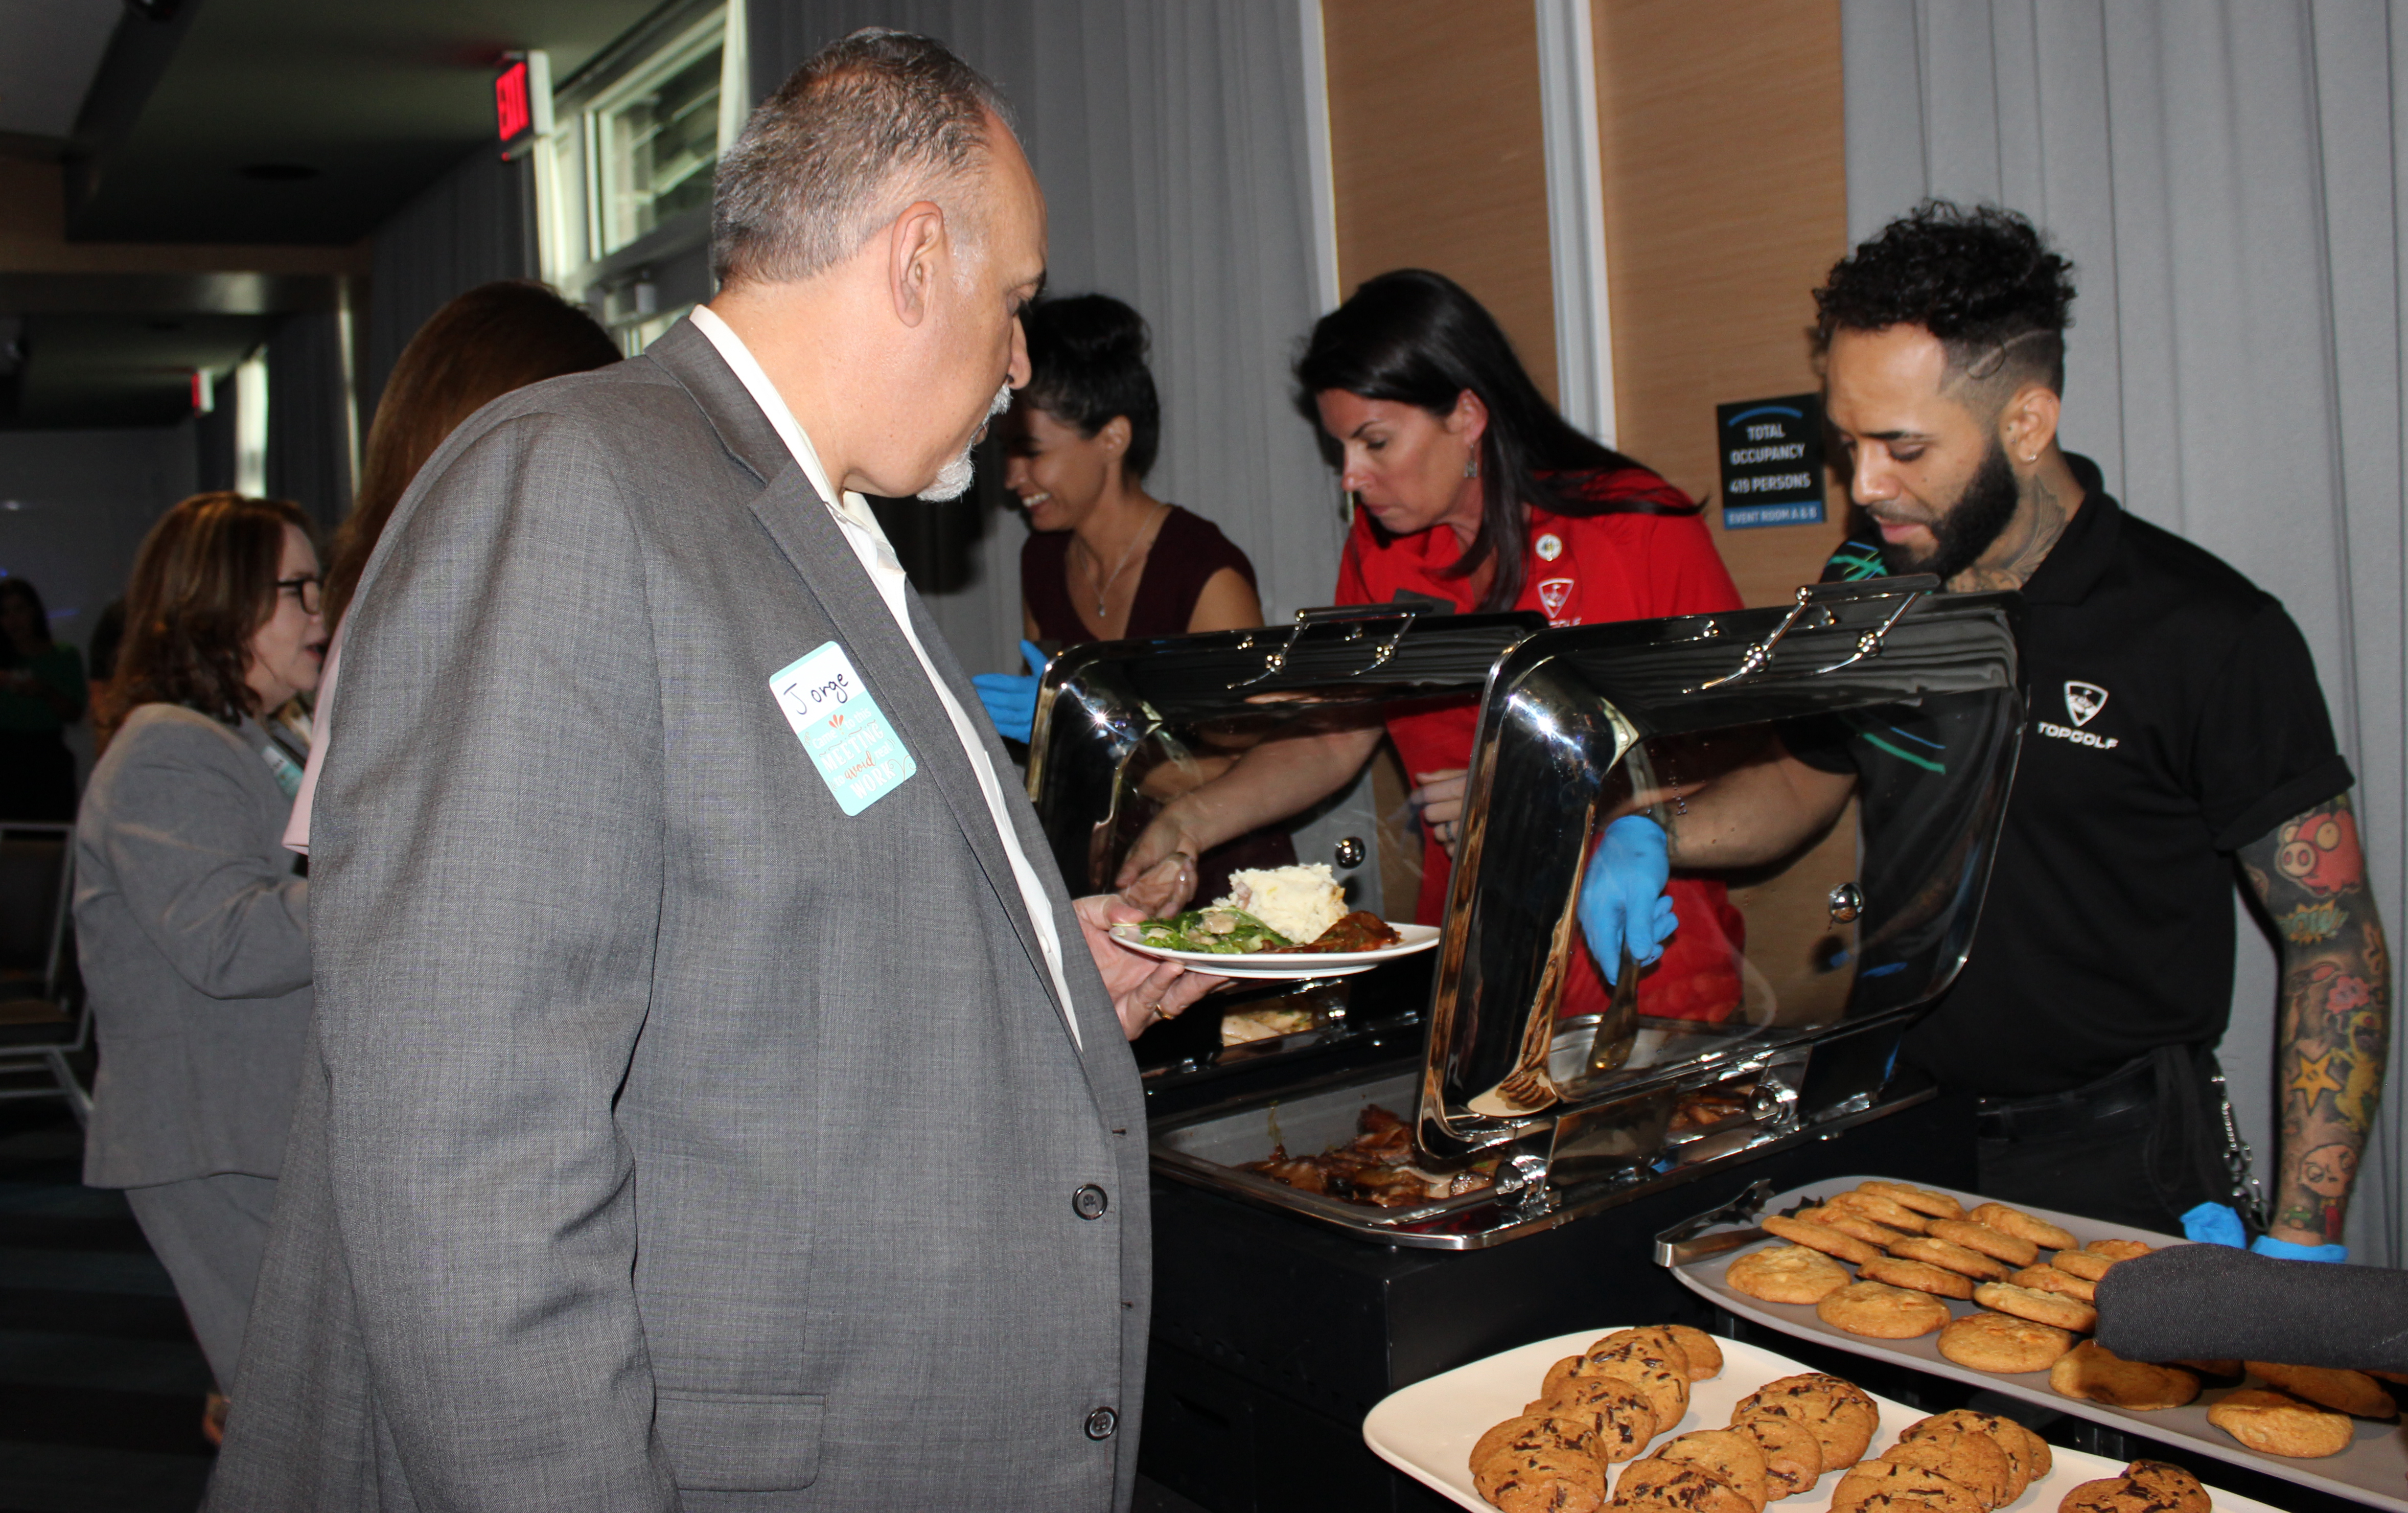 Doral Chamber of Commerce introduces members picking out food from the table at Topgolf Doral Networking Luncheon Event.